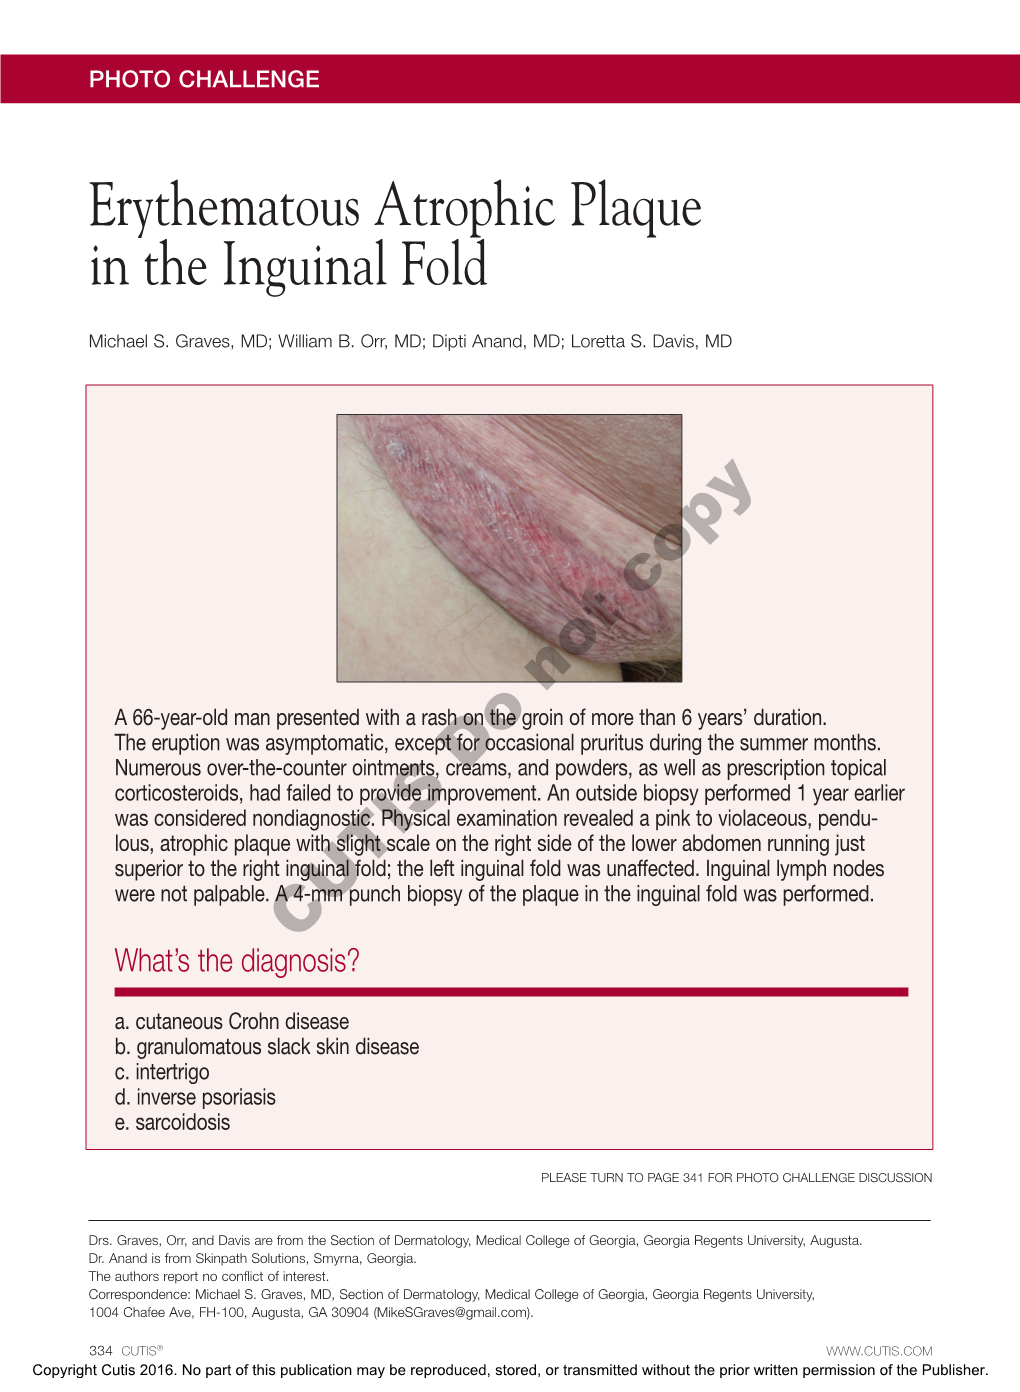 Erythematous Atrophic Plaque in the Inguinal Fold